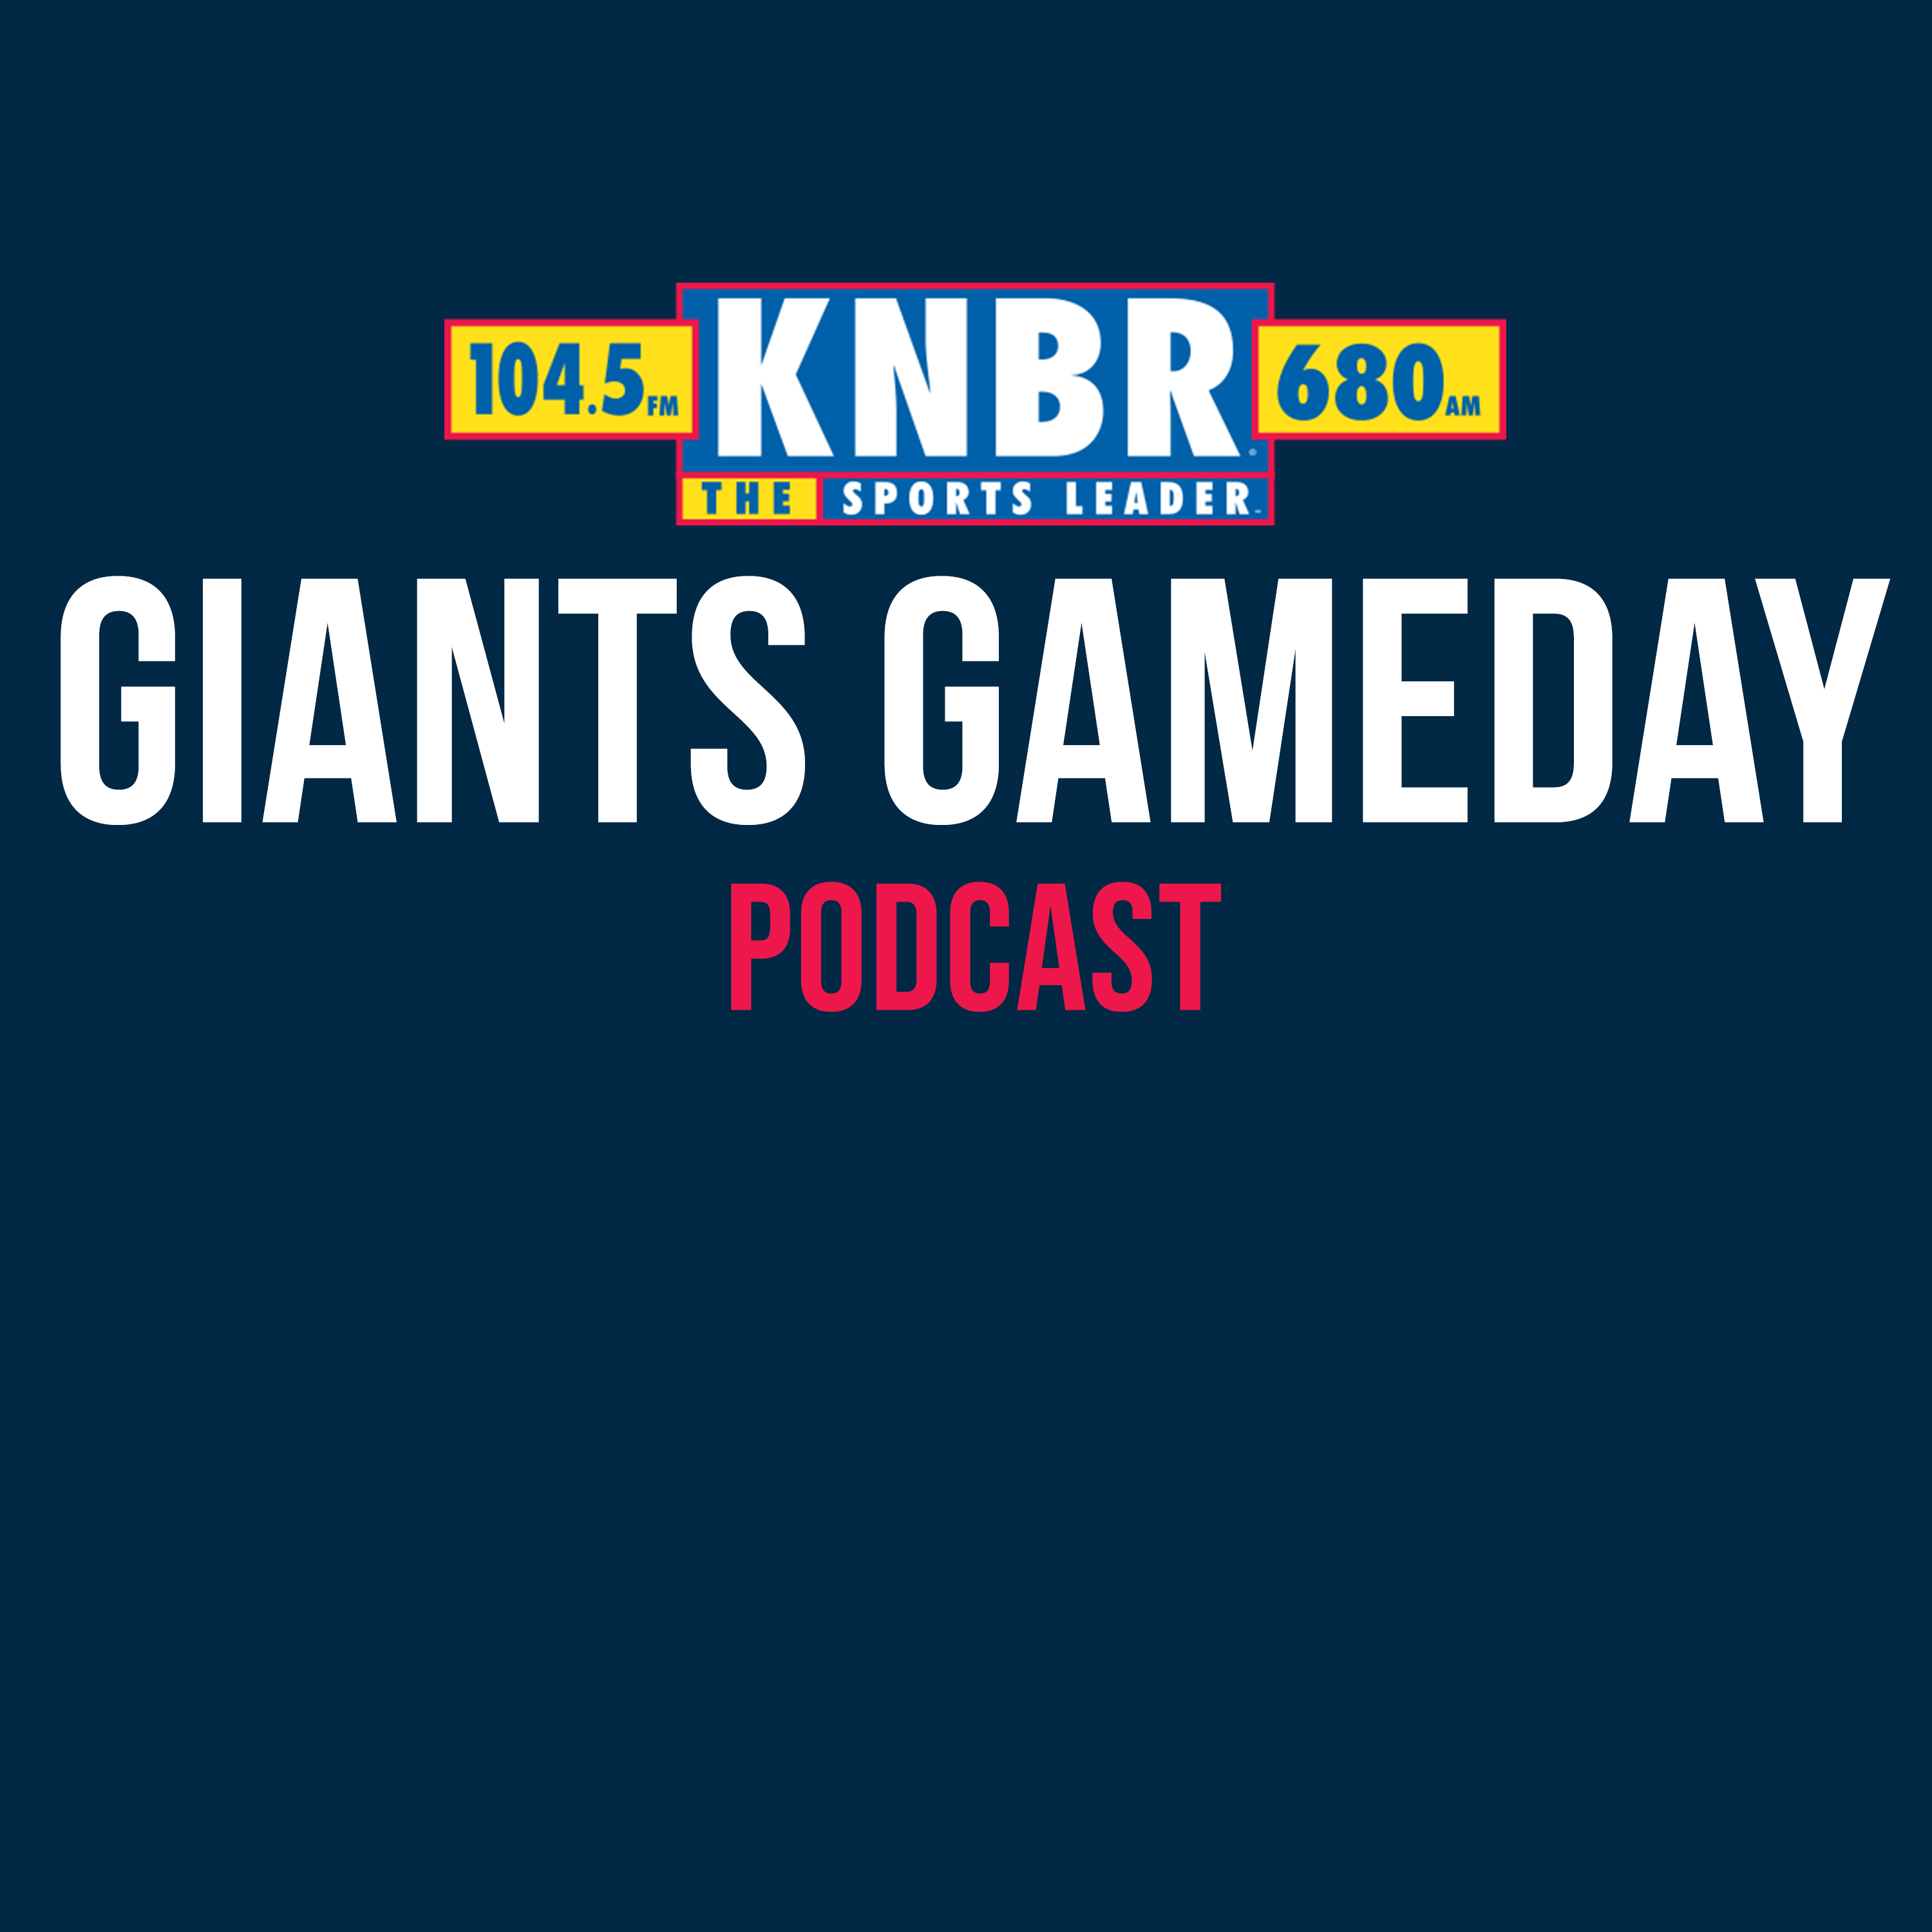 8-21 Postgame Highlights: Giants 6 A's 5